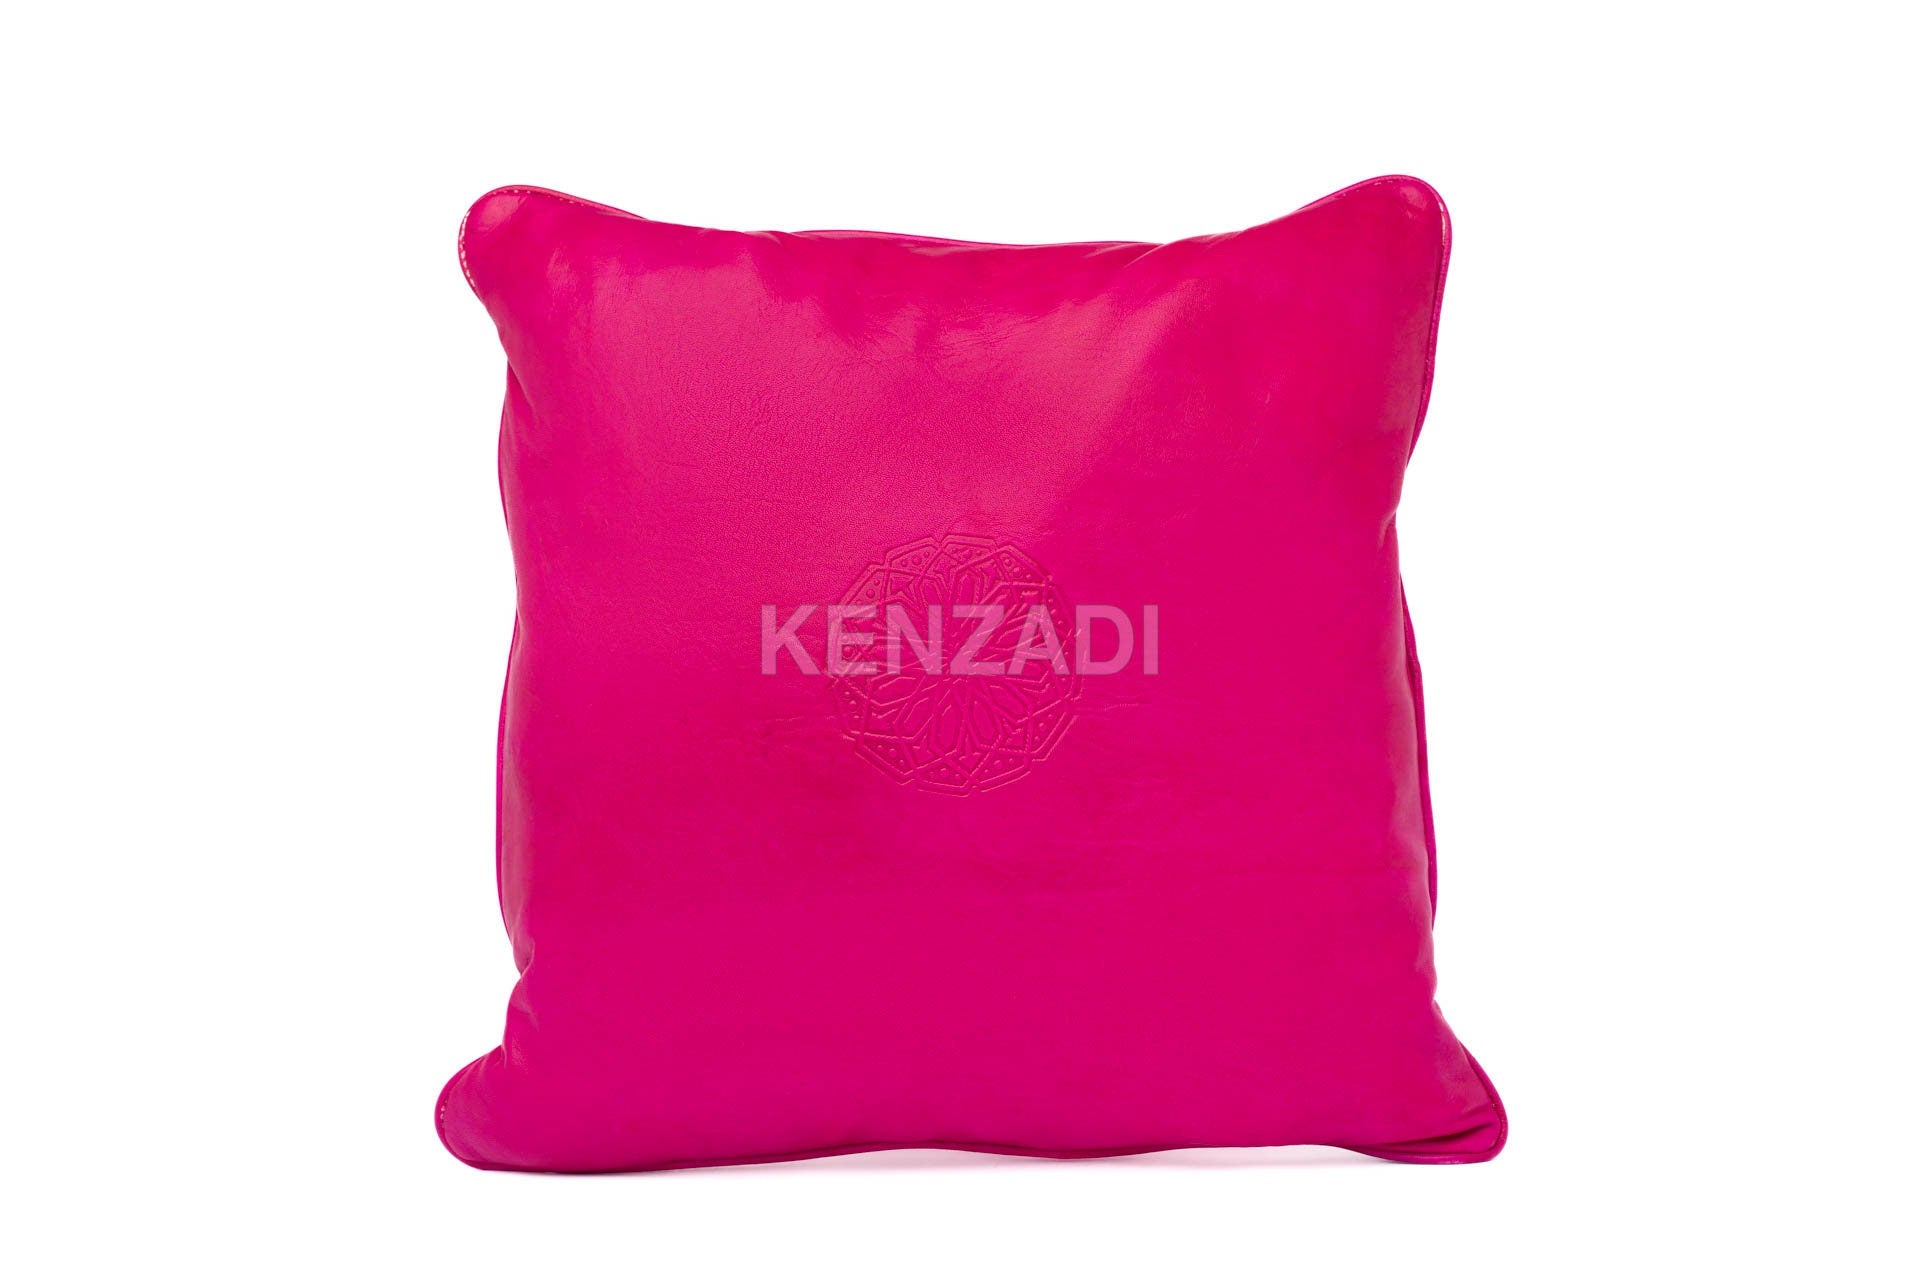 Pink Moroccan leather pillowcase - Handmade, waterproof, and easy to clean - Perfect for indoor and outdoor use - Add a touch of elegance and modernity to your home décor